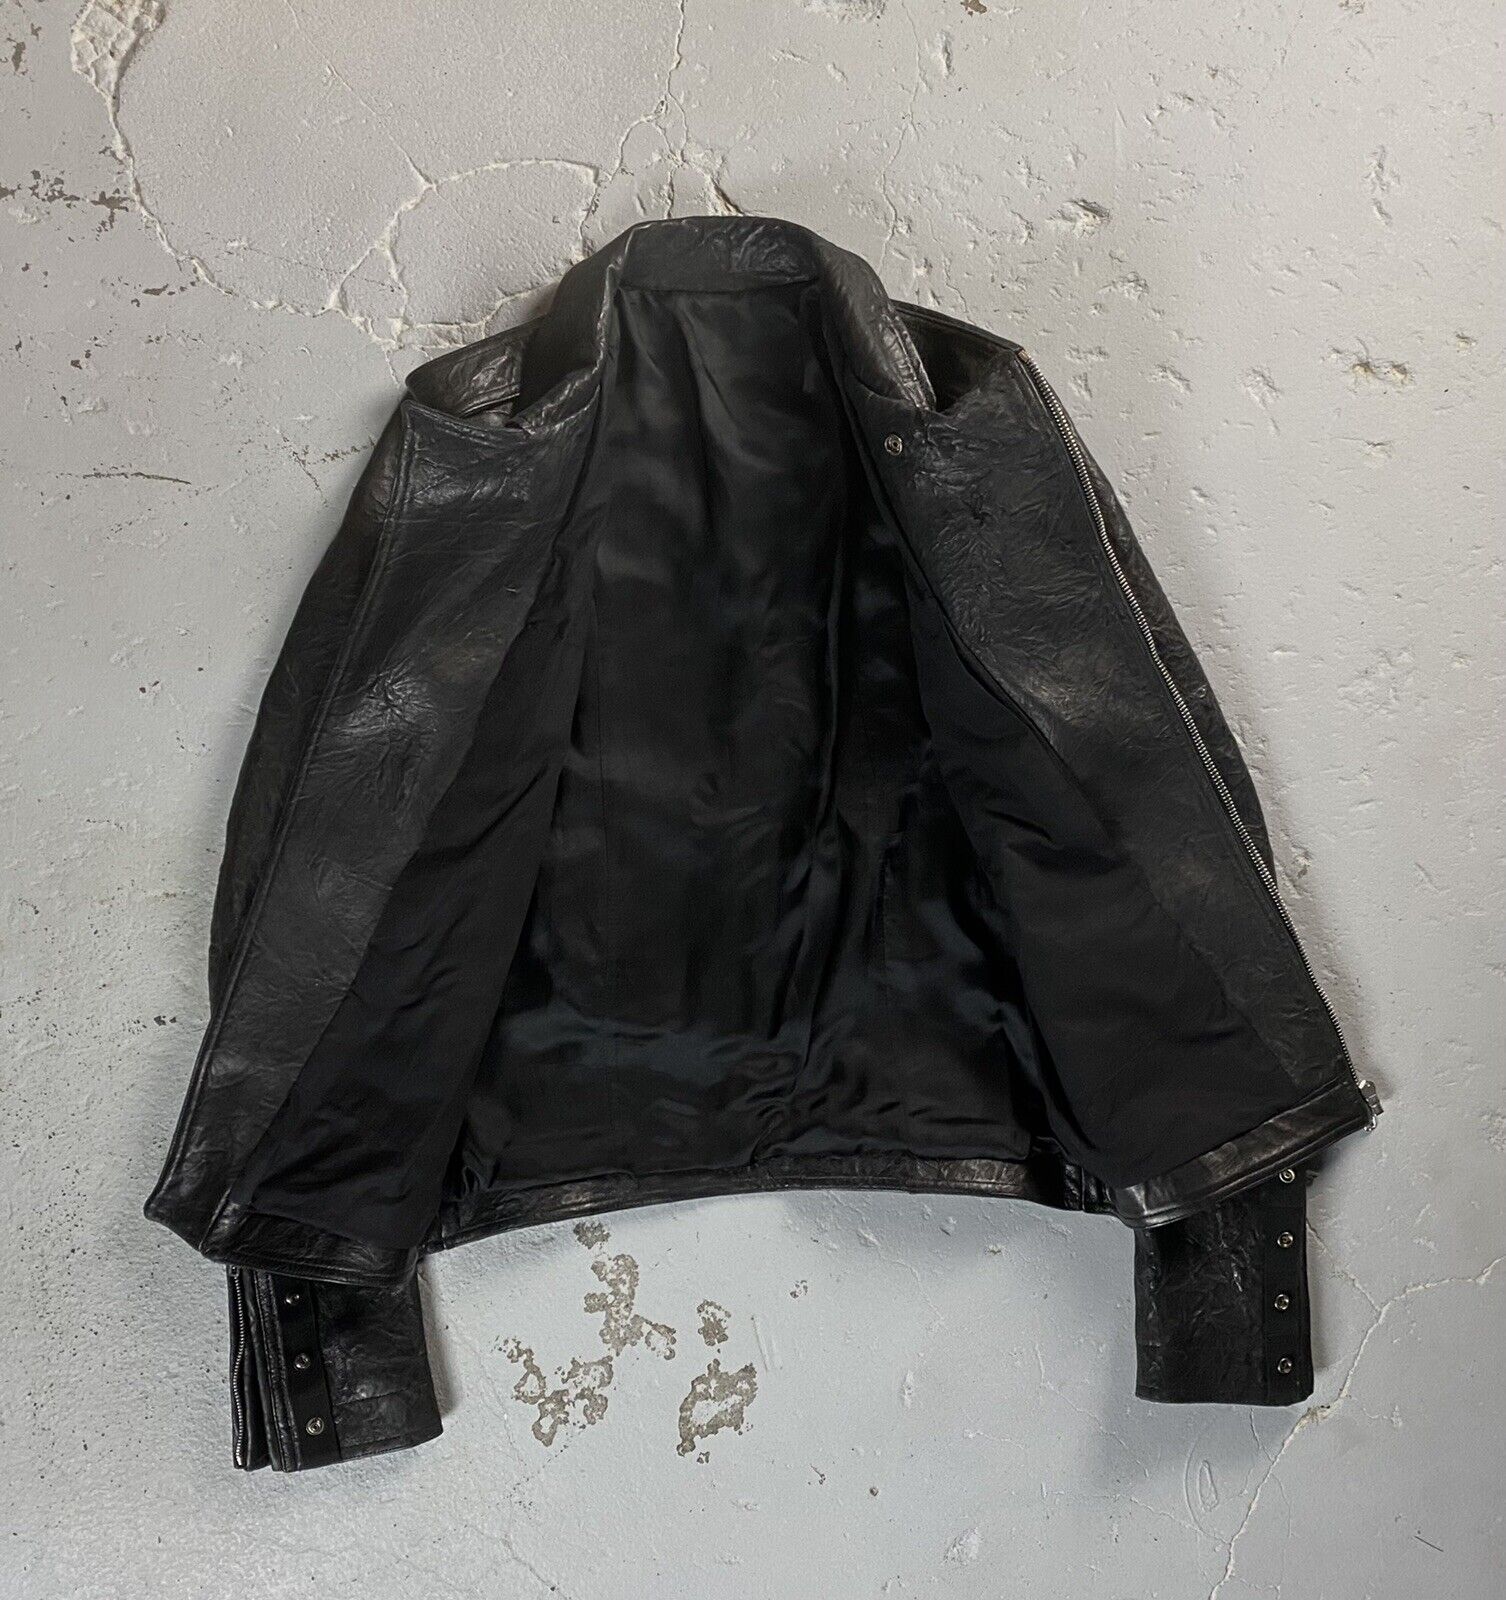 Rick Owens Stooges Leather Jacket Size 48 Small Faun 2015 Rugged 